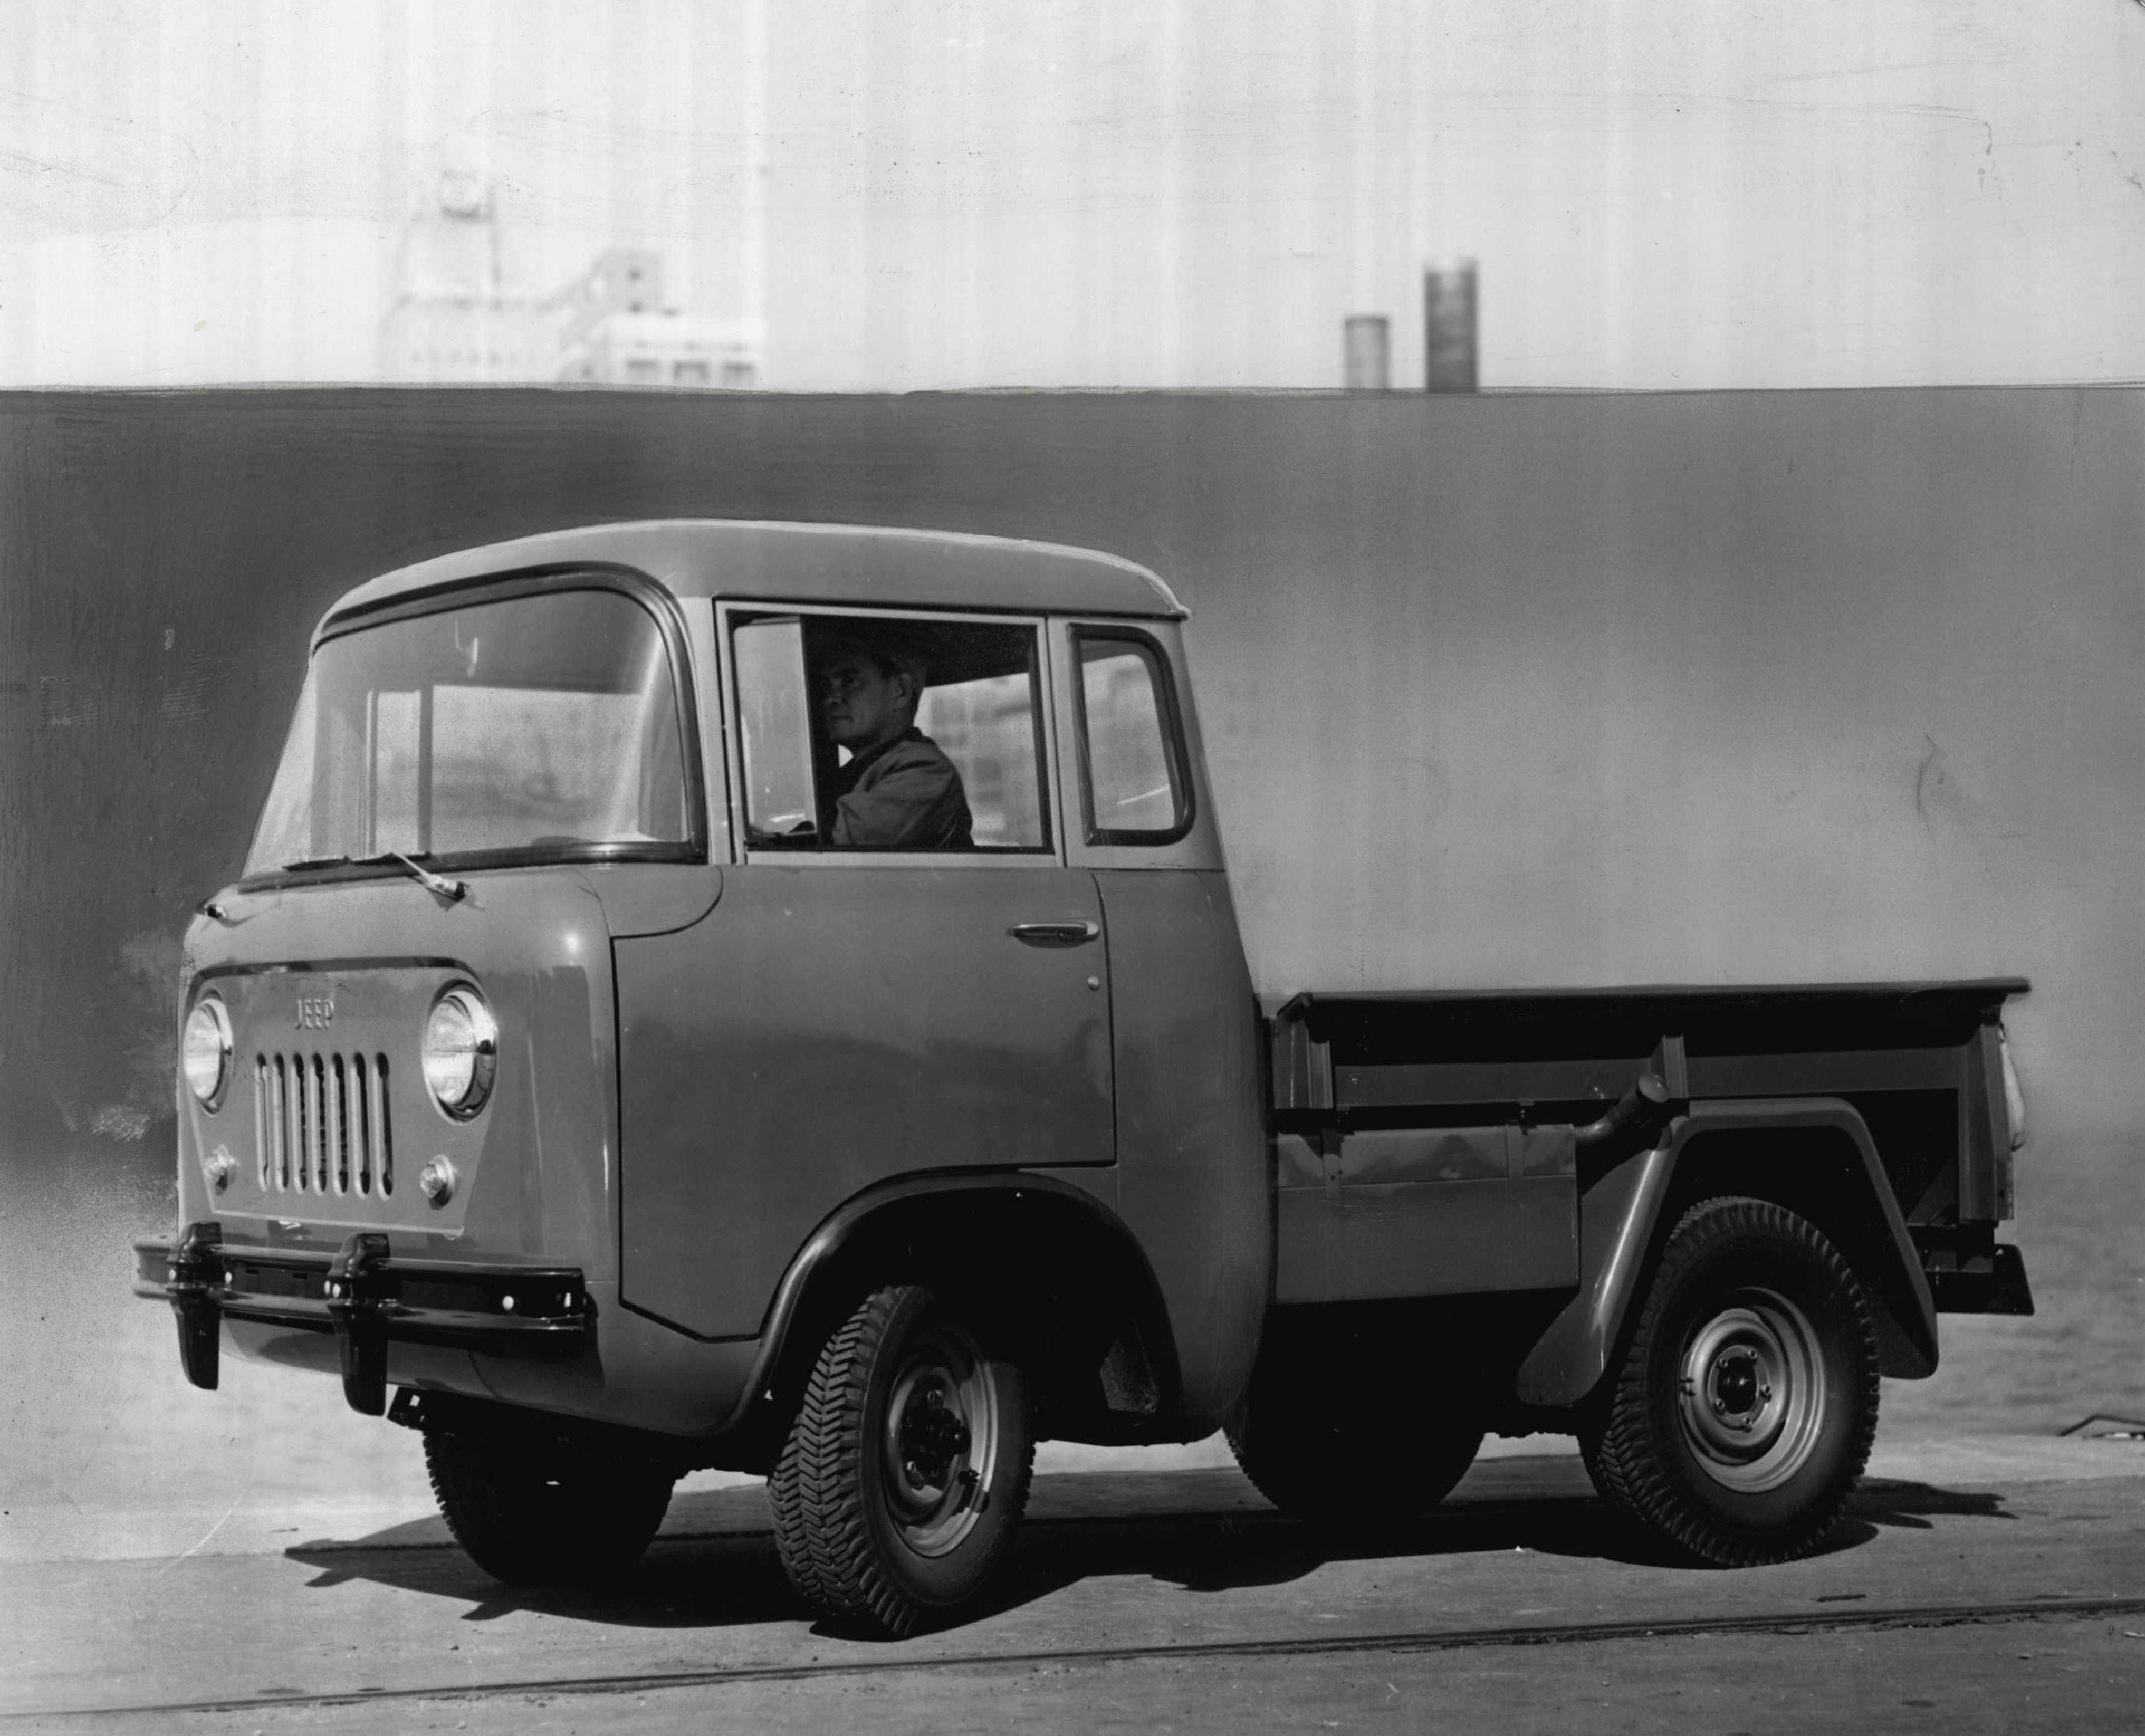 A Willys Overland Corporation Forward Control Jeep FC-150 photographed December 4, 1956.